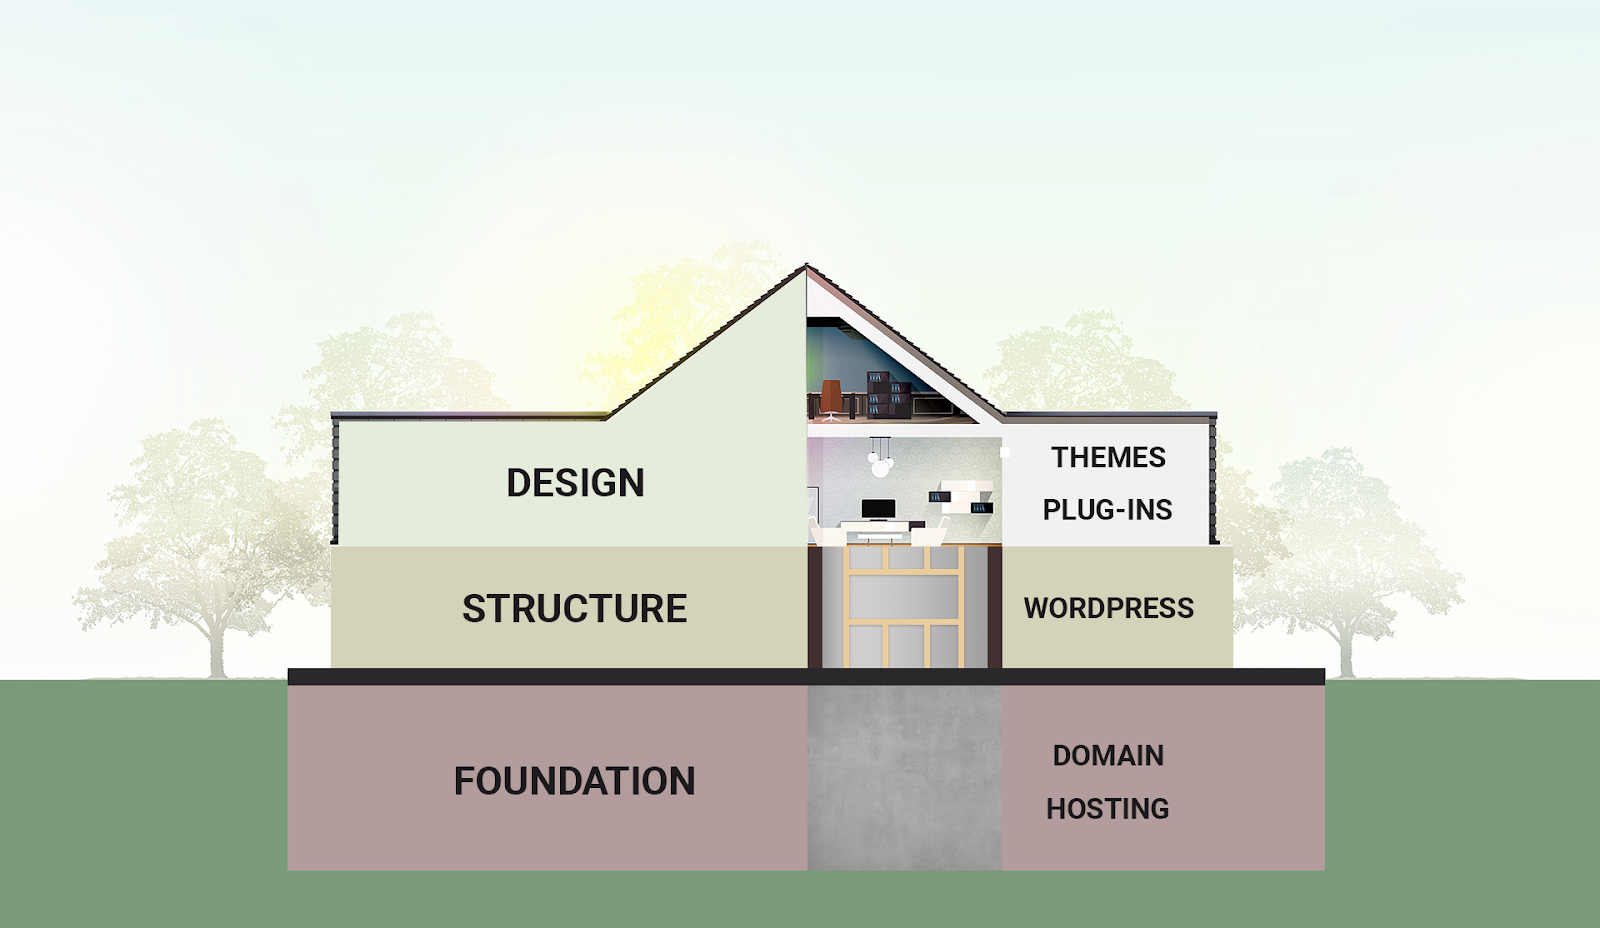 how to build a strong website like a house - the three fundamentals are foundation, structure and design 